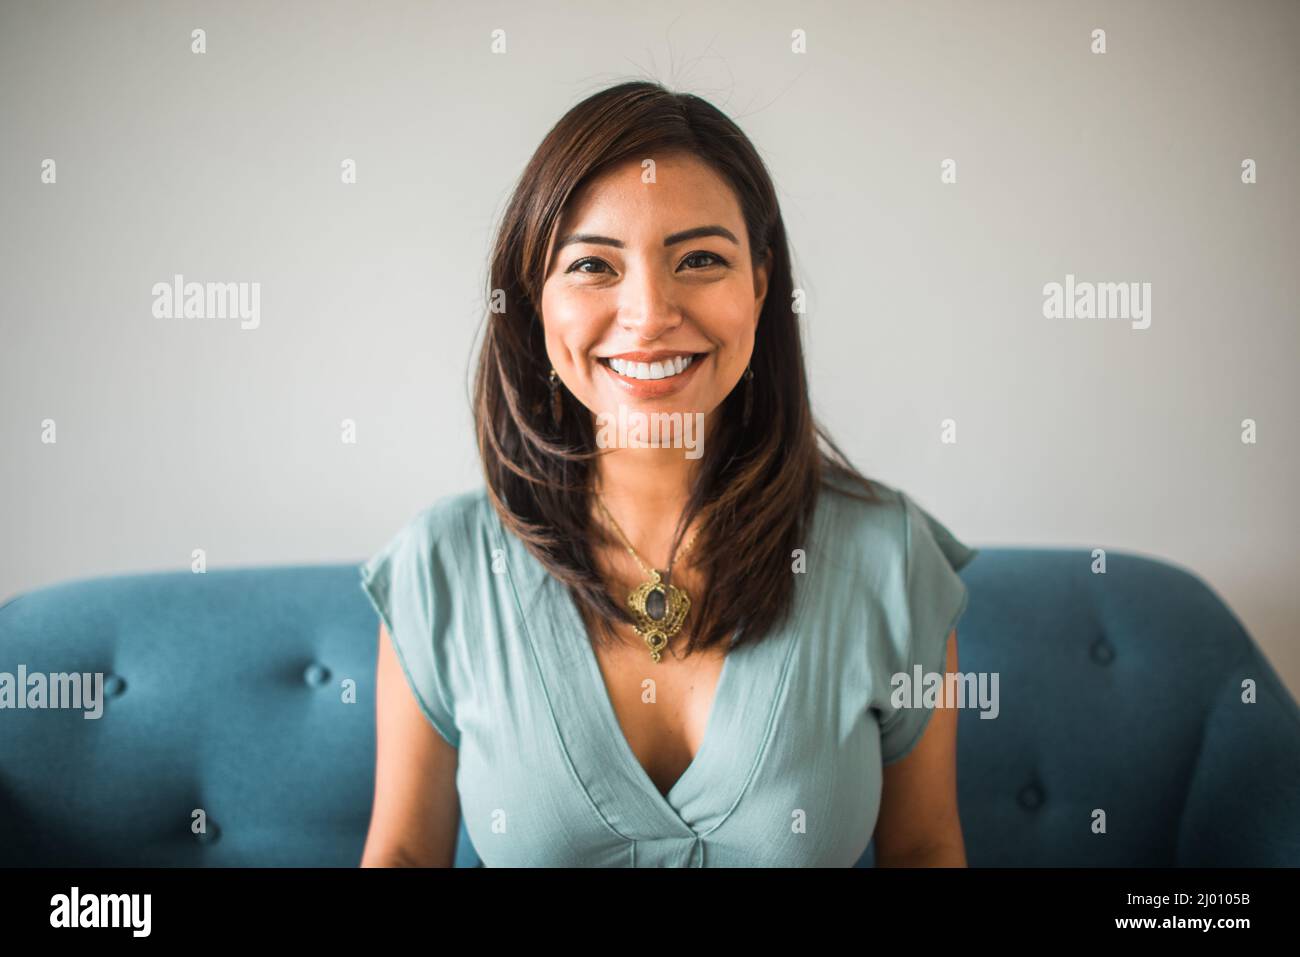 portrait of a smiling woman looking at the camera sitting on the sofa at home Stock Photo